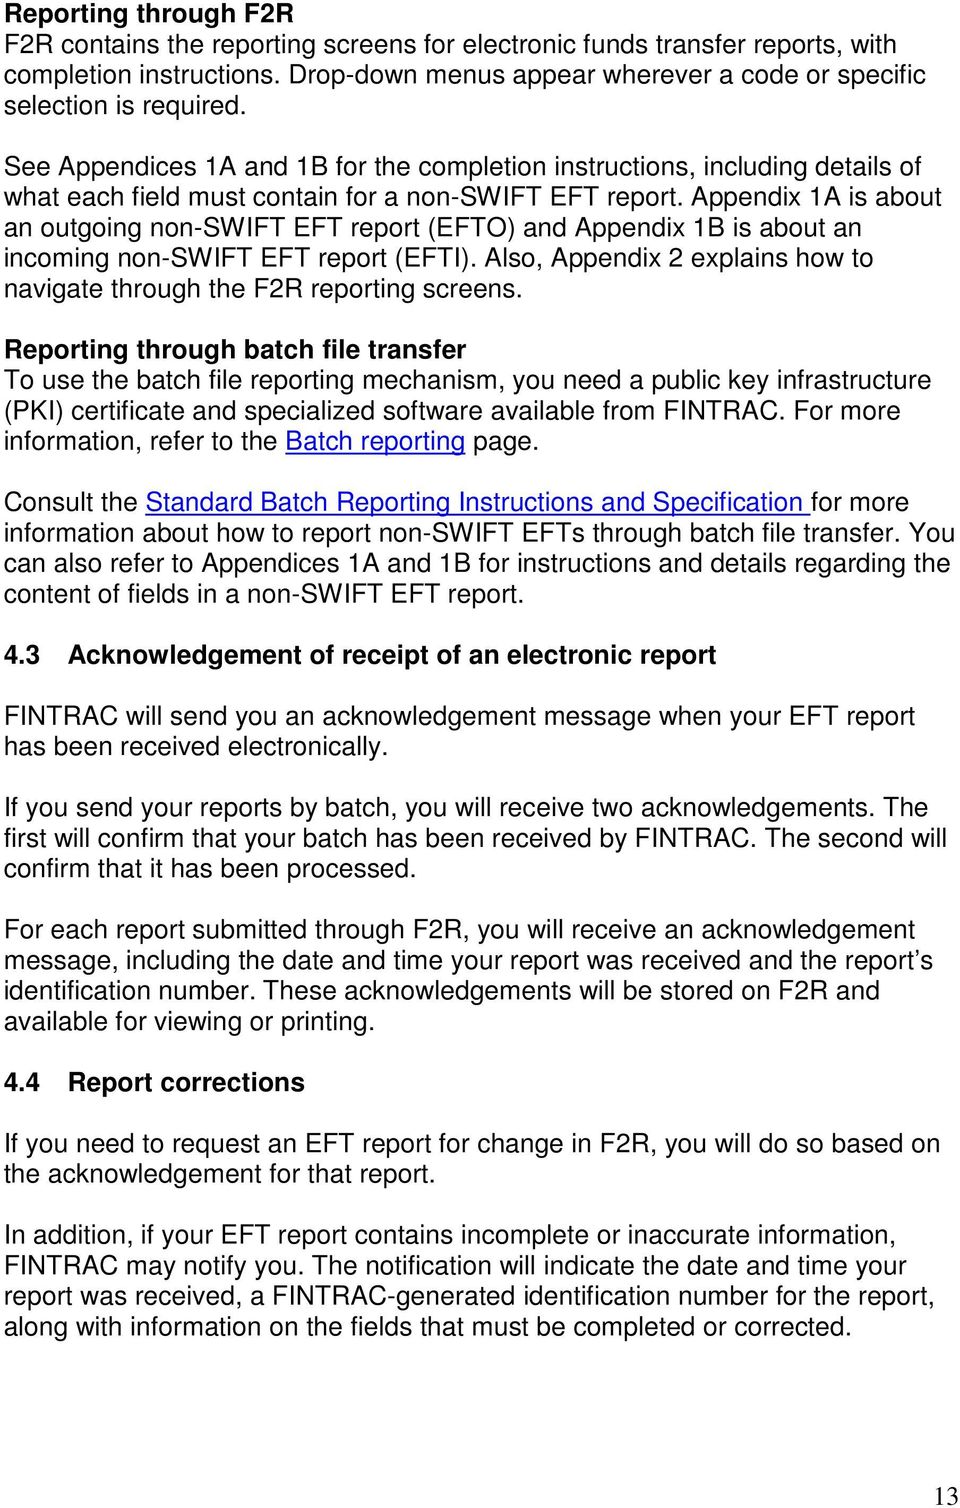 Appendix 1A is about an outgoing non-swift EFT report (EFTO) and Appendix 1B is about an incoming non-swift EFT report (EFTI).